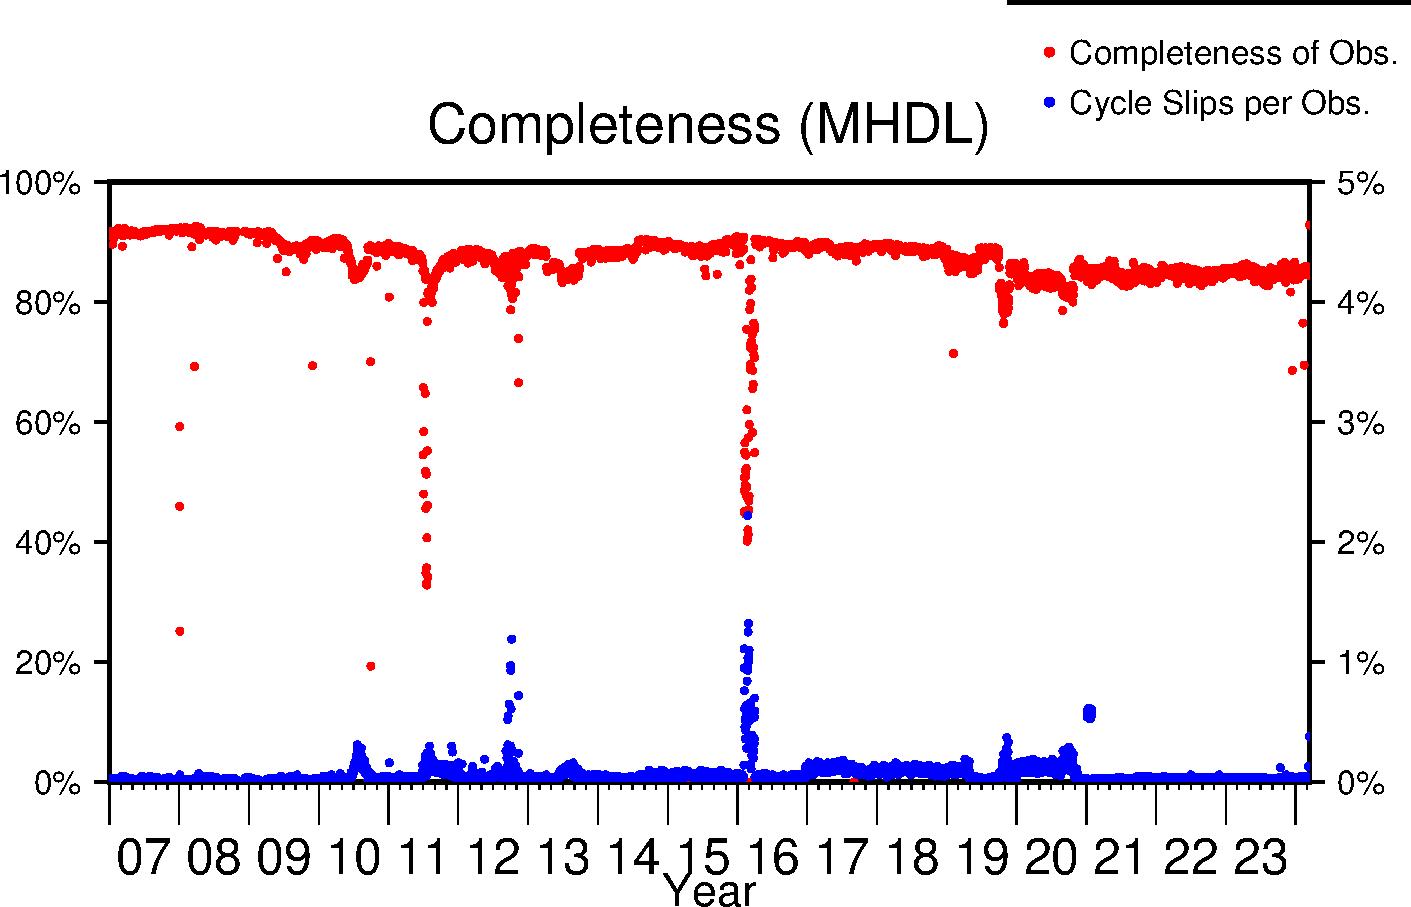 MHDL completeness lifetime